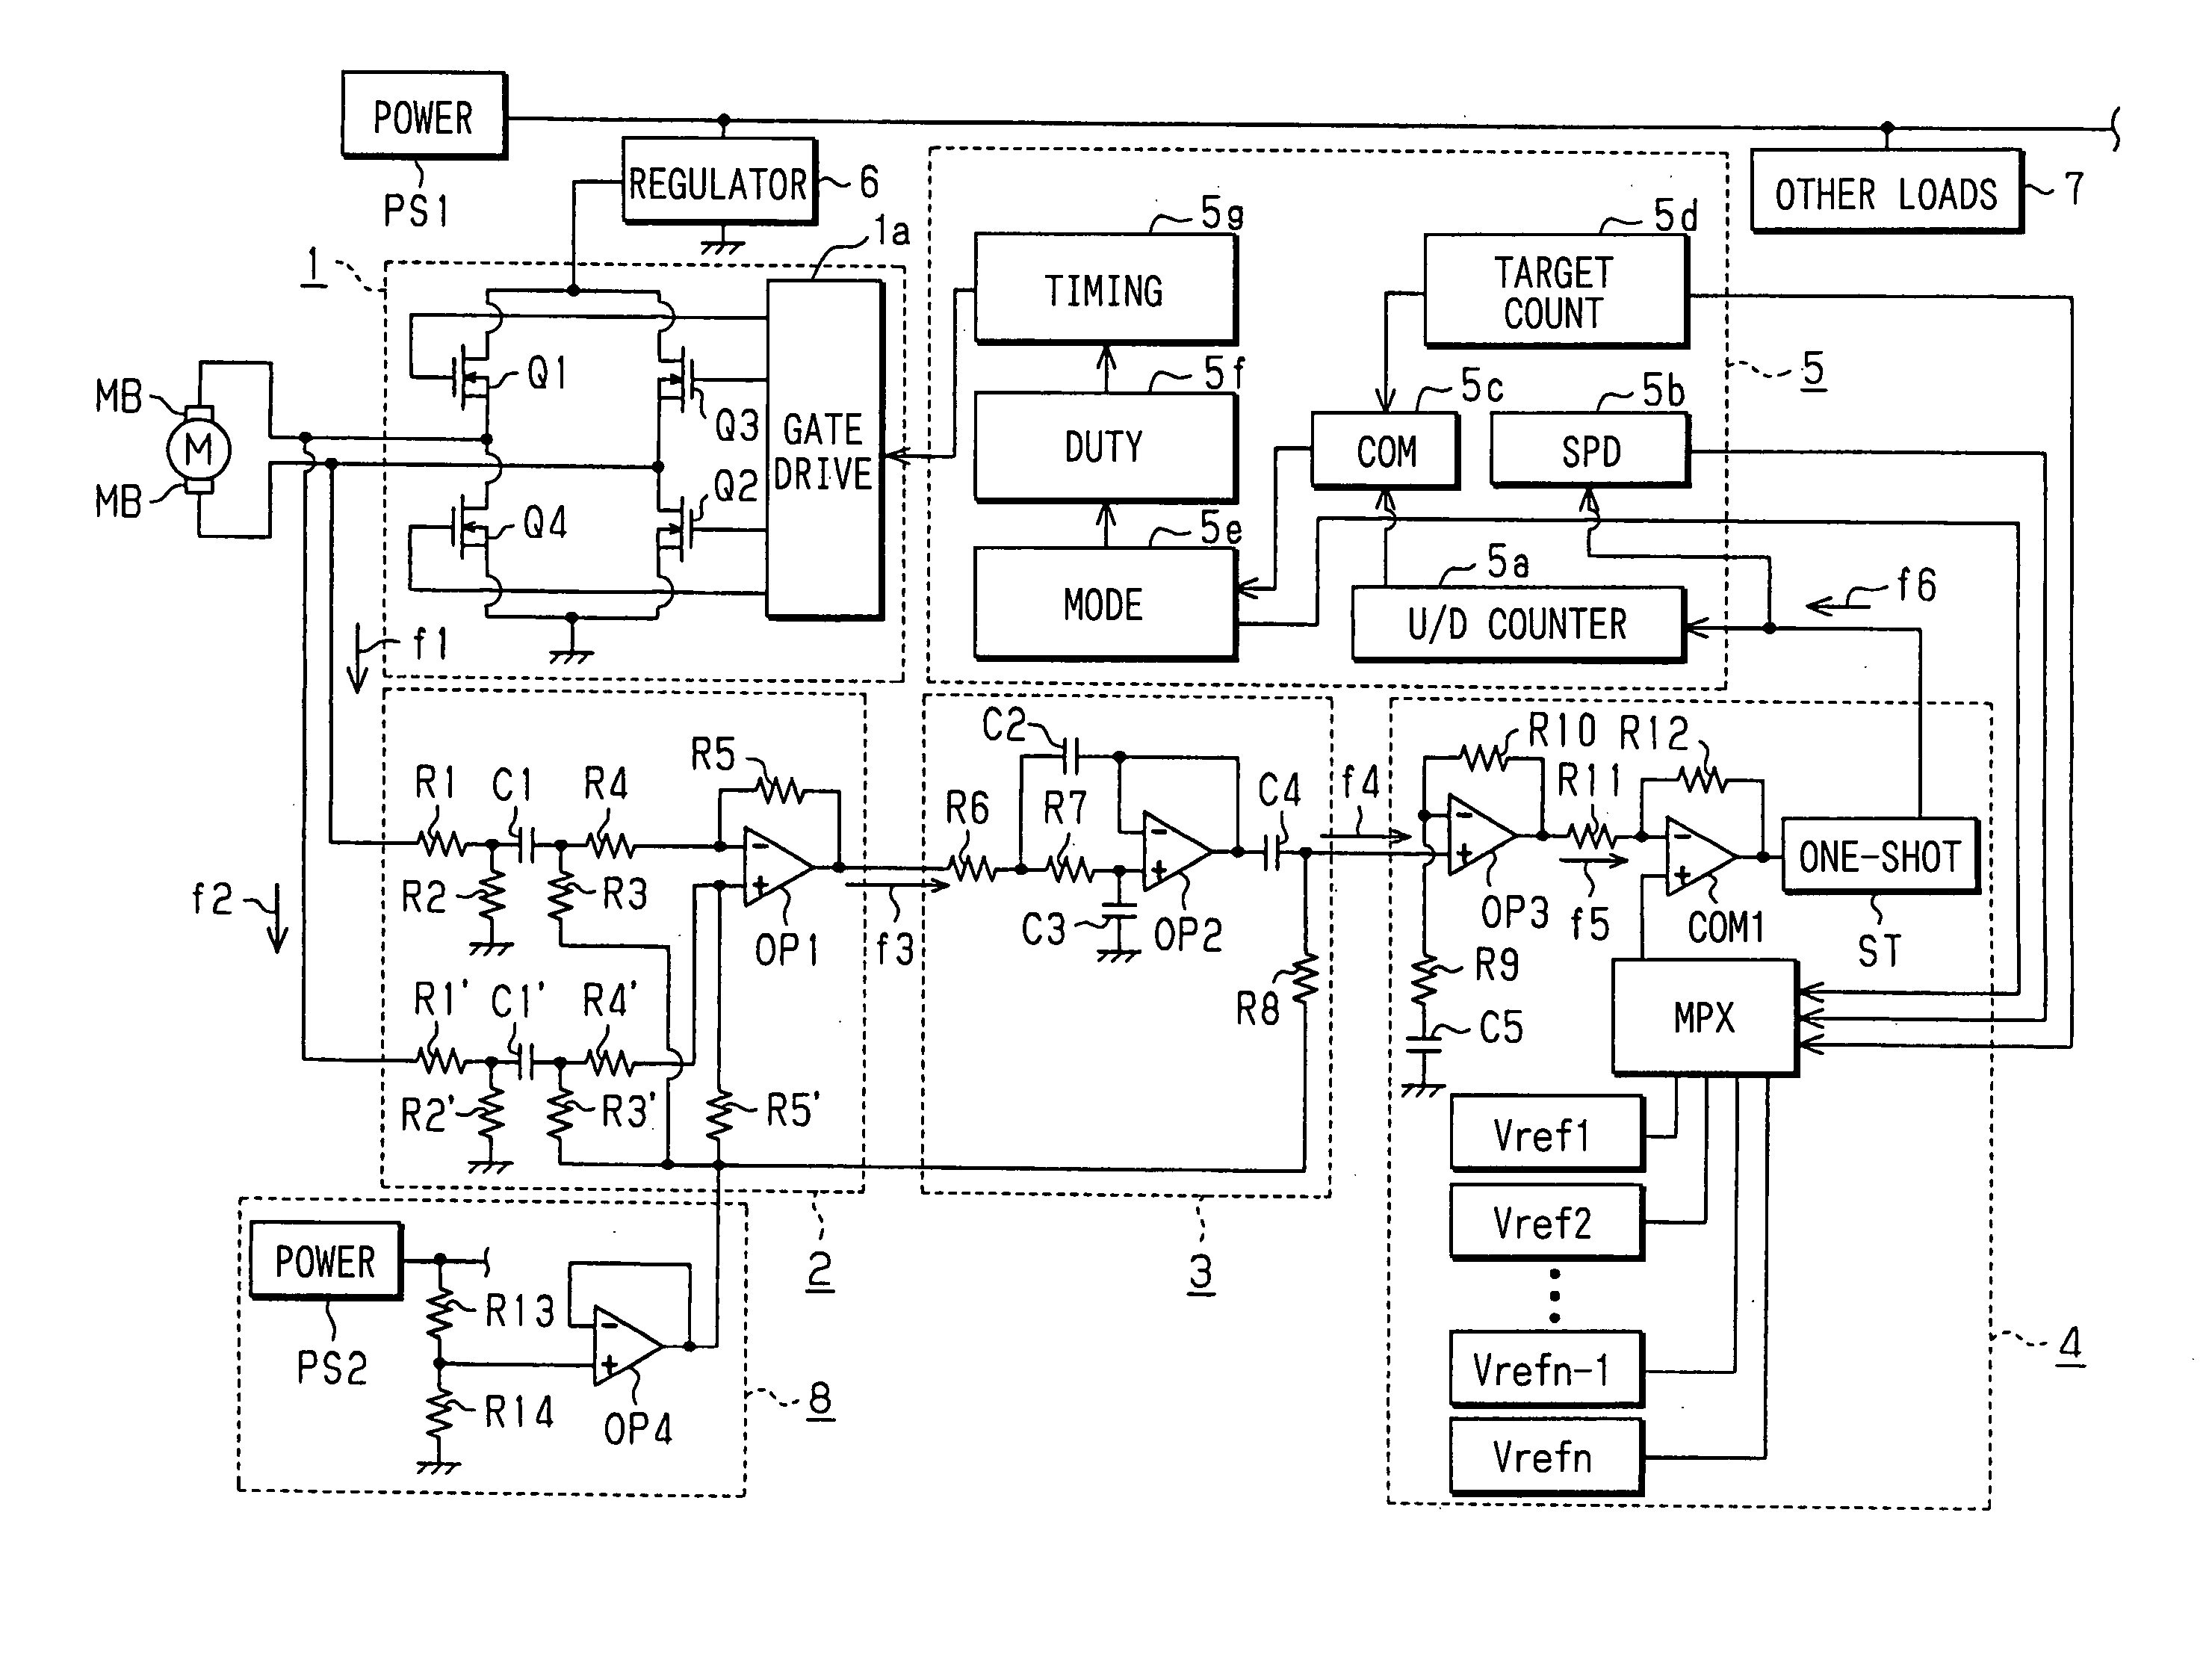 DC motor rotation information detecting device